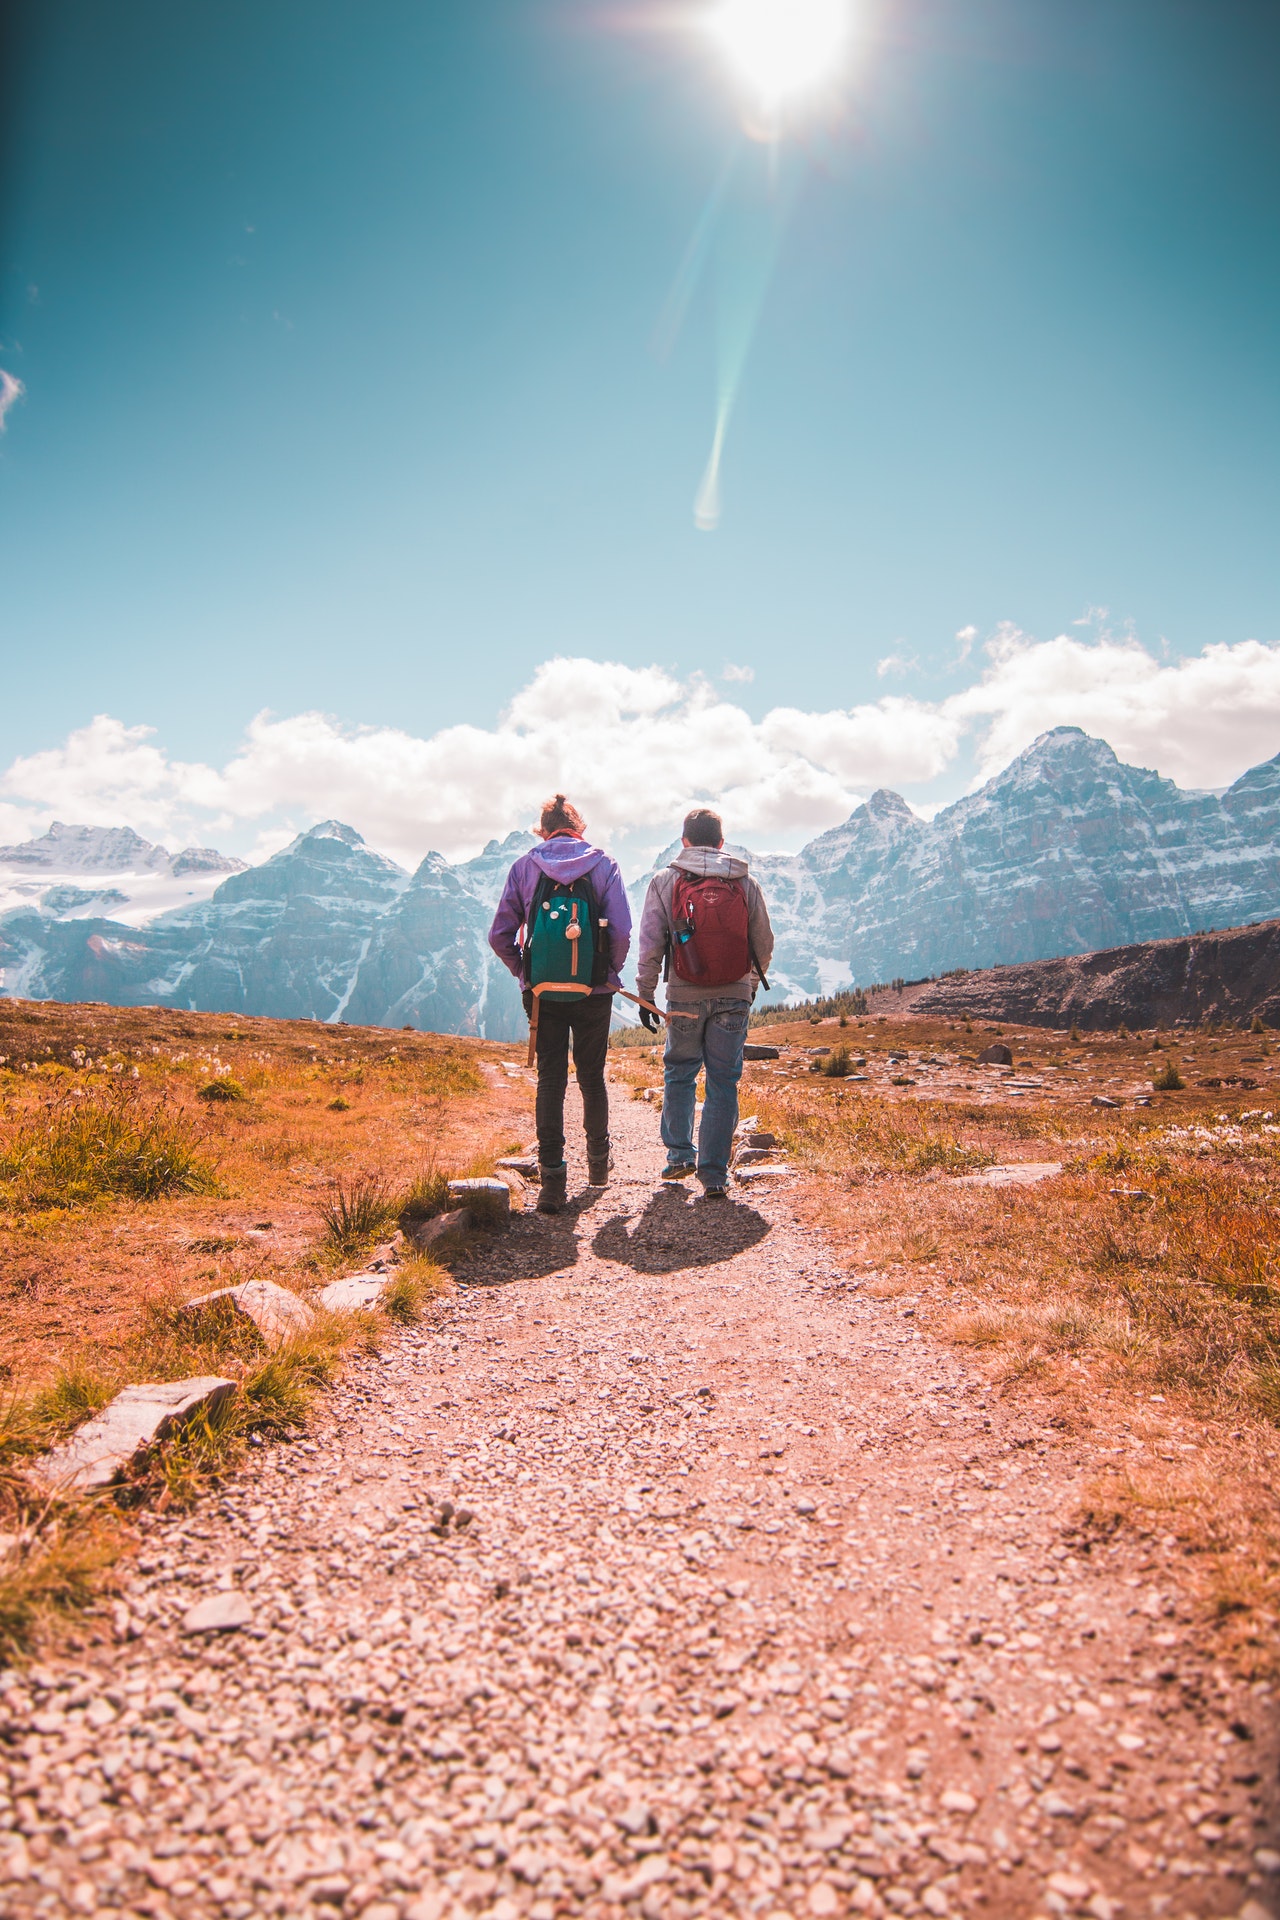 Hiking, get fit without the gym. Ph. Jaime Reimer, Pexels